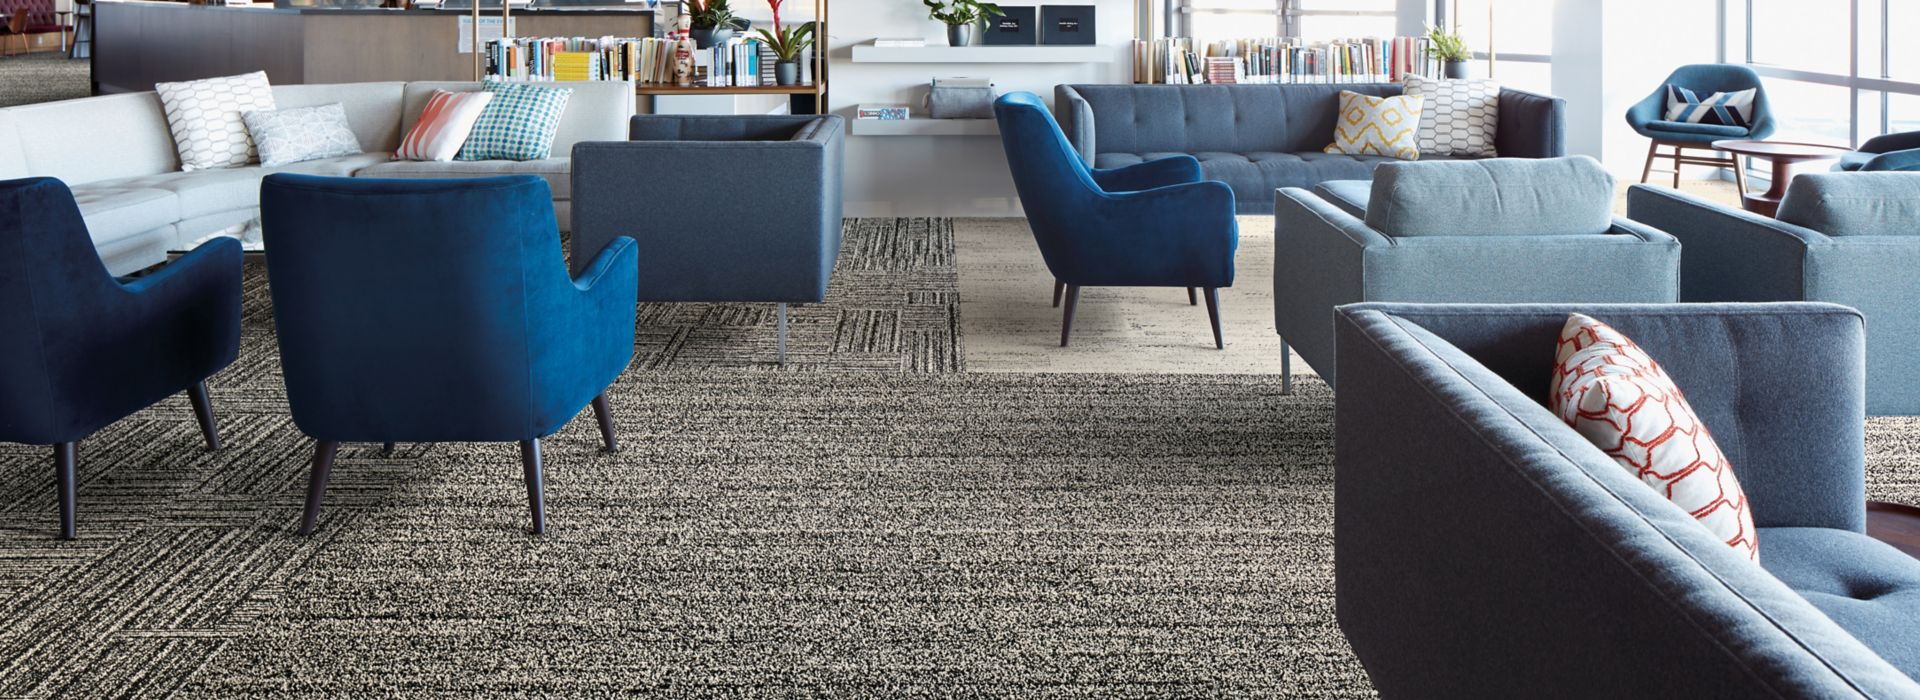 image Interface Overedge plank carpet tile in open lounge area with chairs and couches numéro 1